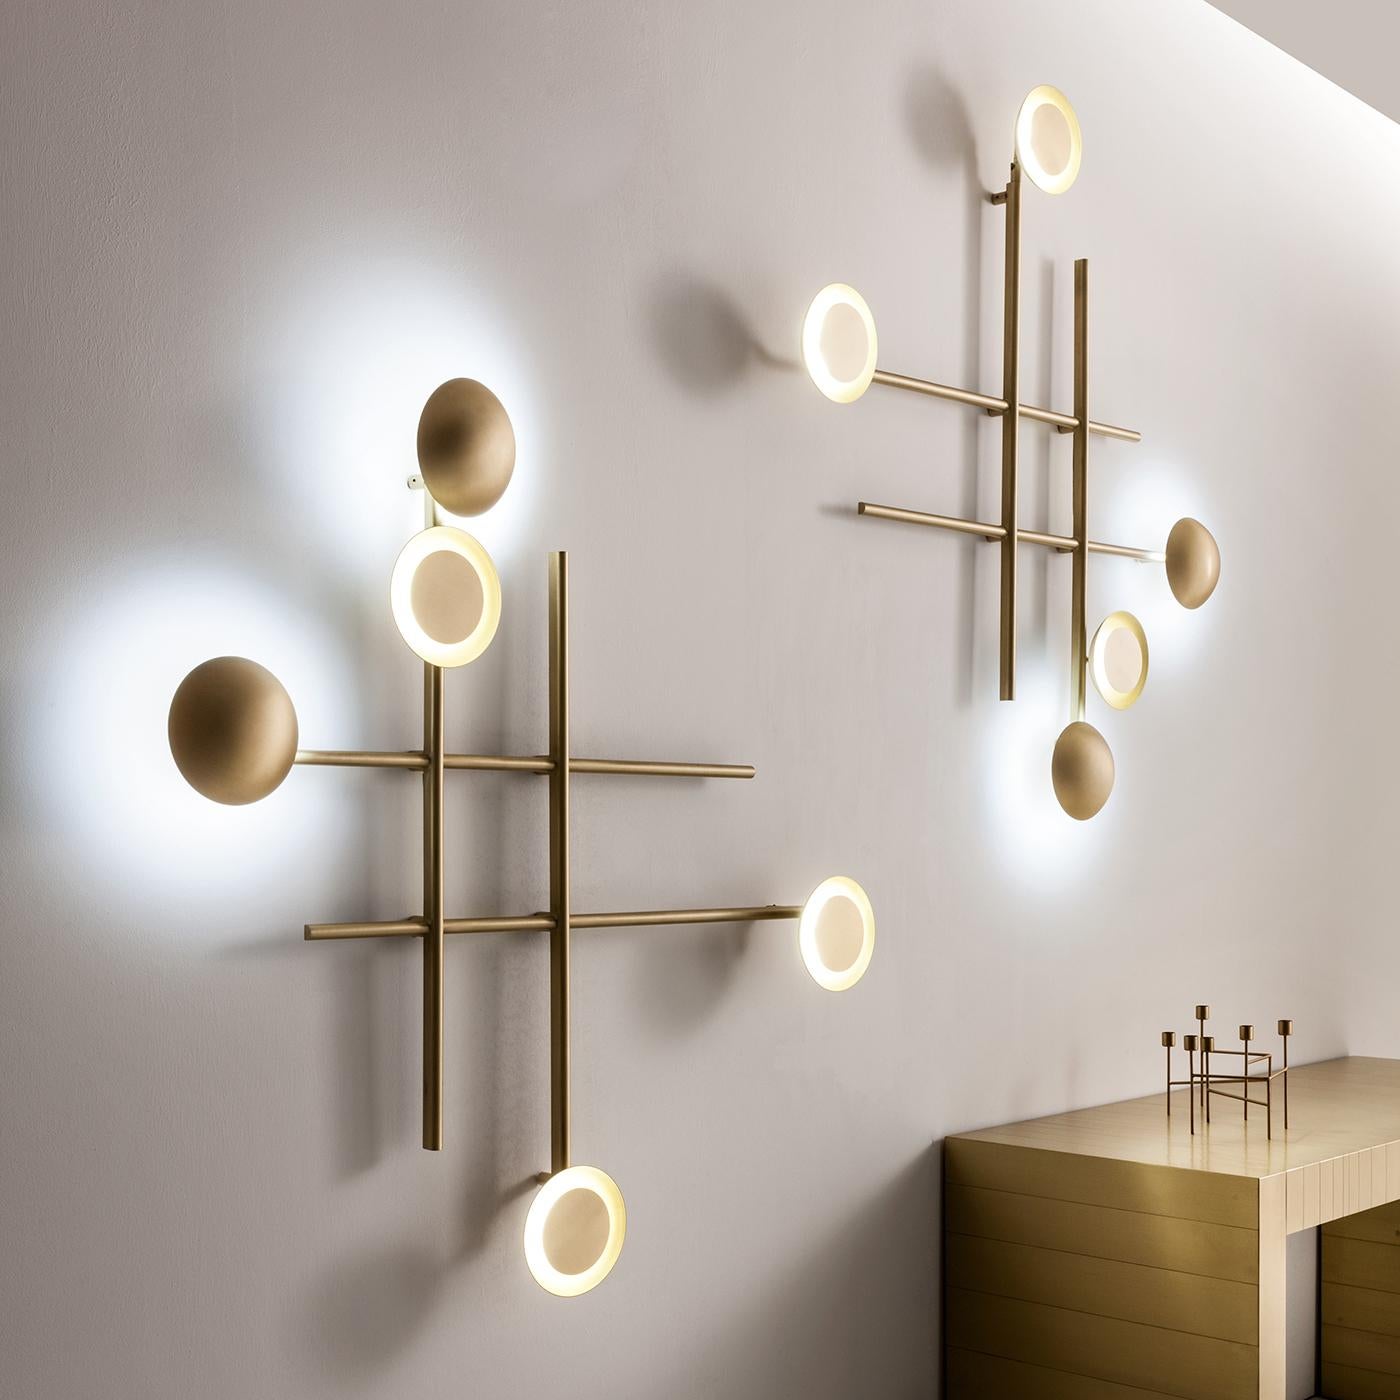 The Gaia wall lamp combines the functionality of warm LED lighting with impressive architectural geometry. This distinctive design by Cesare Arosio is extremely versatile and different configurations of the discs covering the LED bulbs create